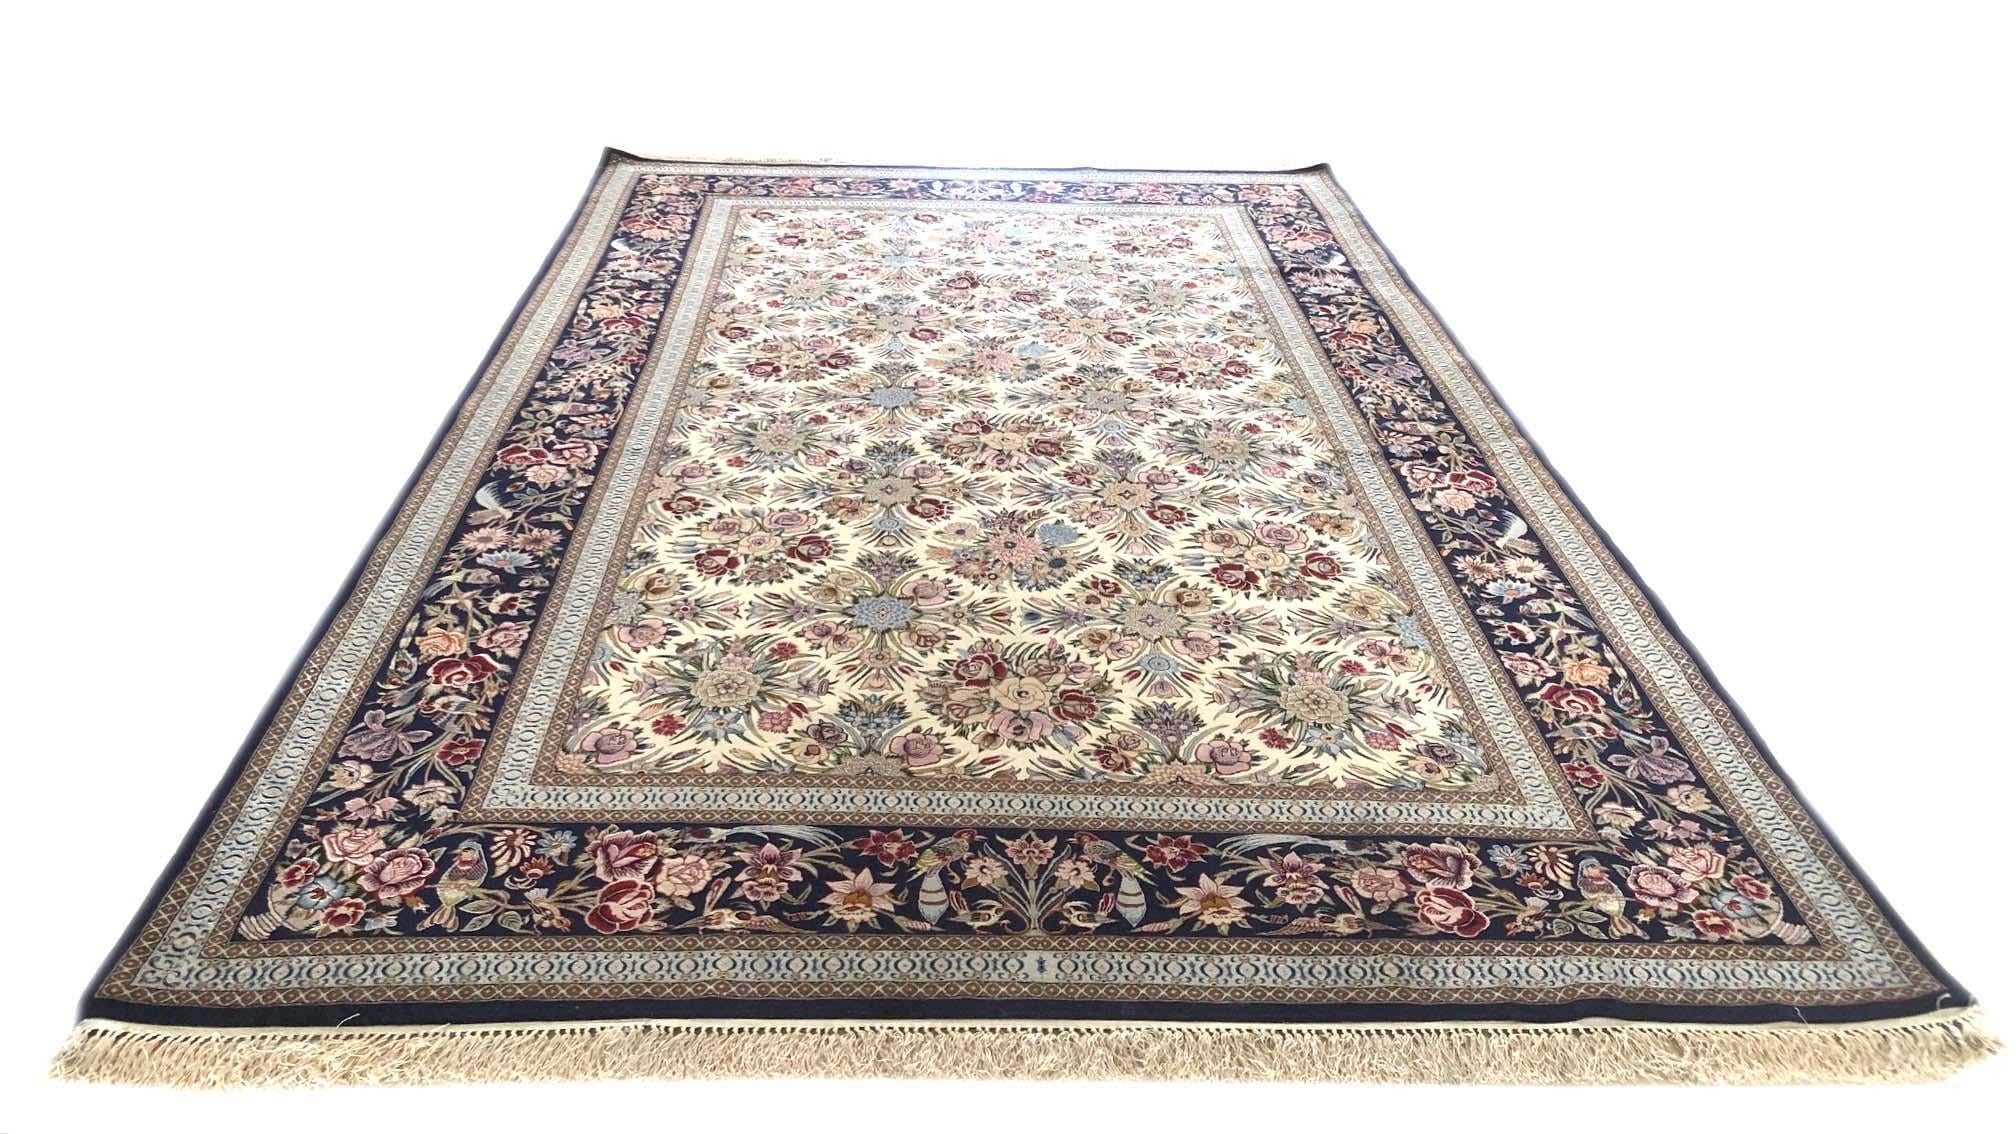 This authentic Persian Isfahan rug has wool and silk pile on silk foundation and has an excellent condition. The color combination and design in this rug is absolutely outstanding. The base color is cream and the border is dark blue. This rug has